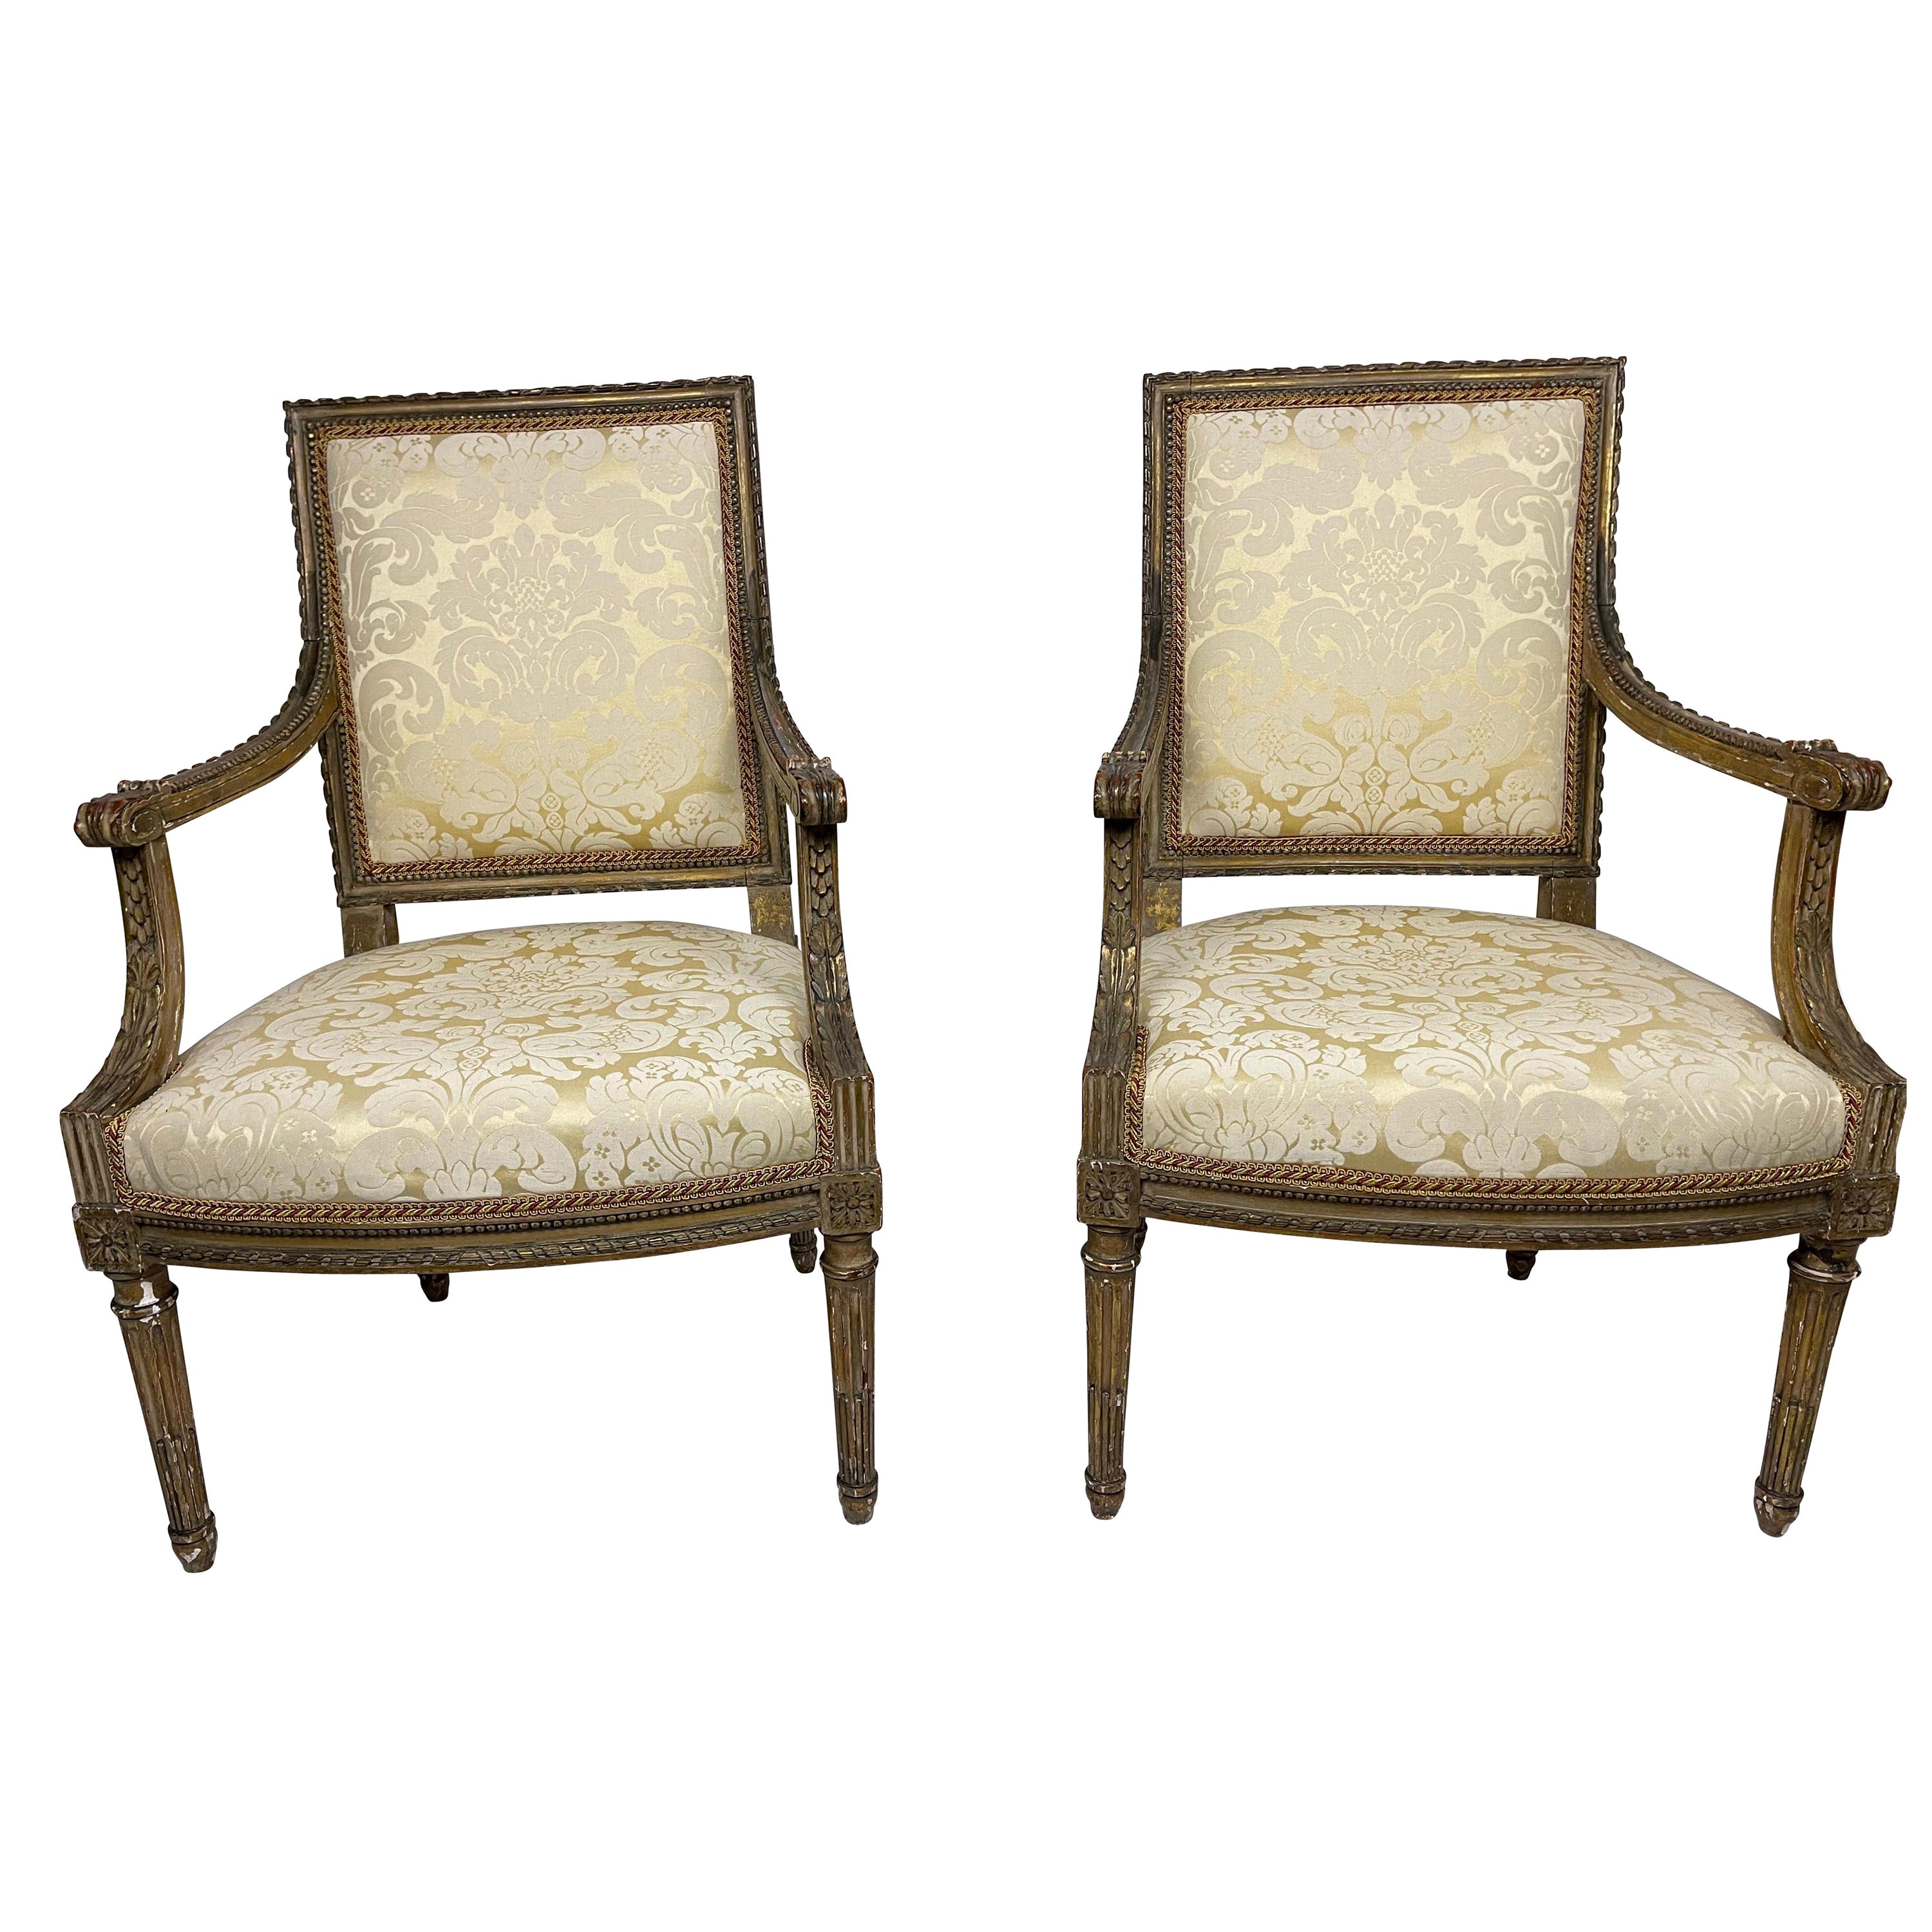 18th Century French Louis XVI Pair of Armchairs with Ivory Damask